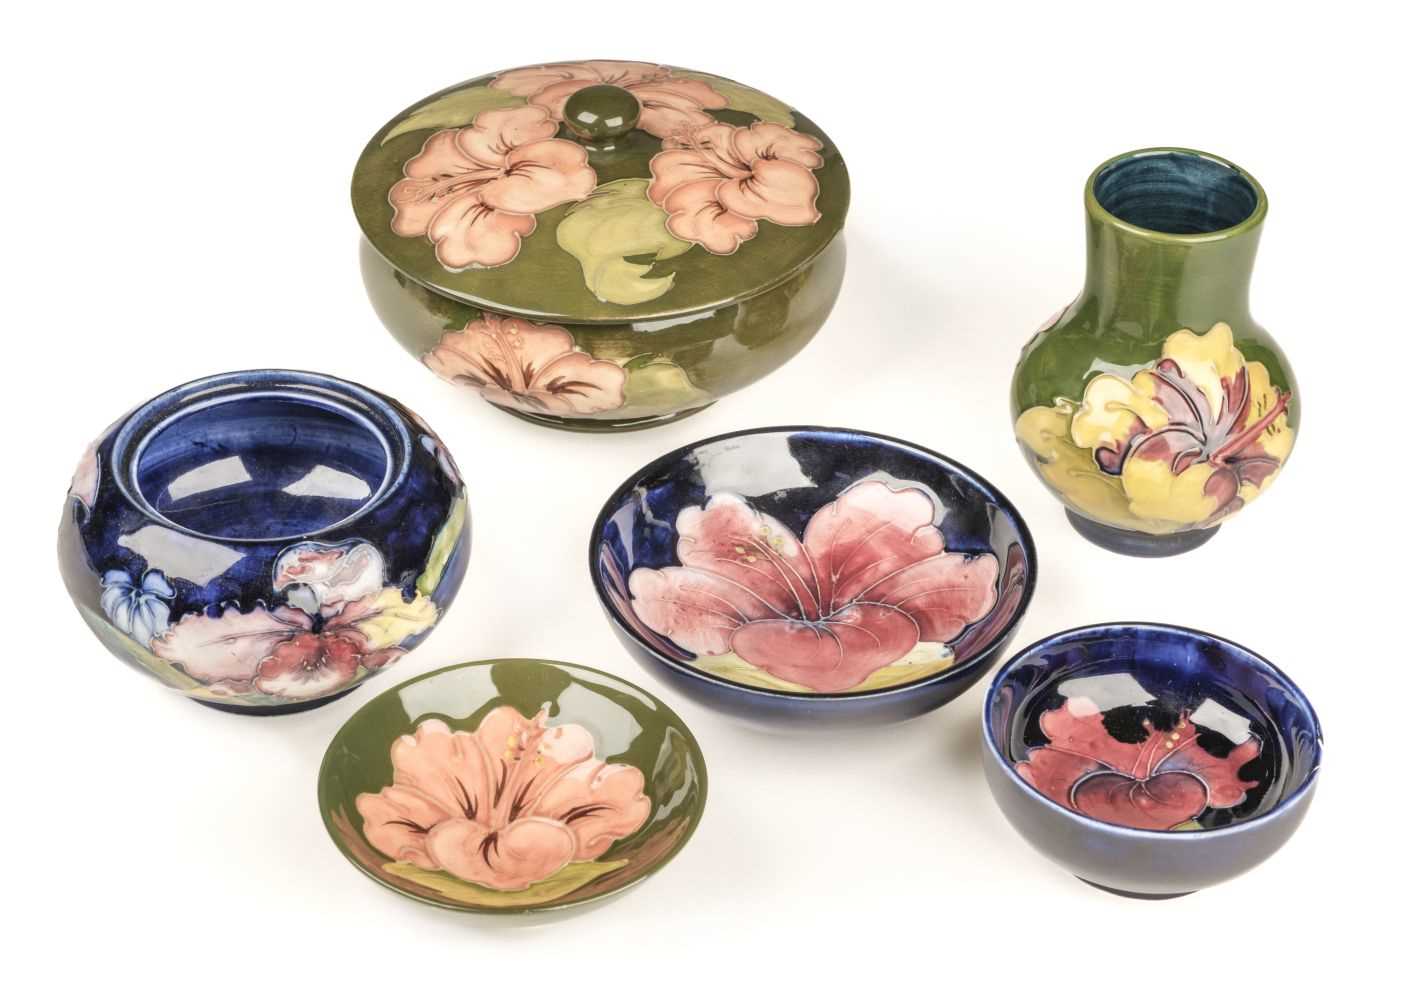 Lot 10 - Moorcroft. A Moorcroft pottery Hibiscus pattern lidded bowl and other items